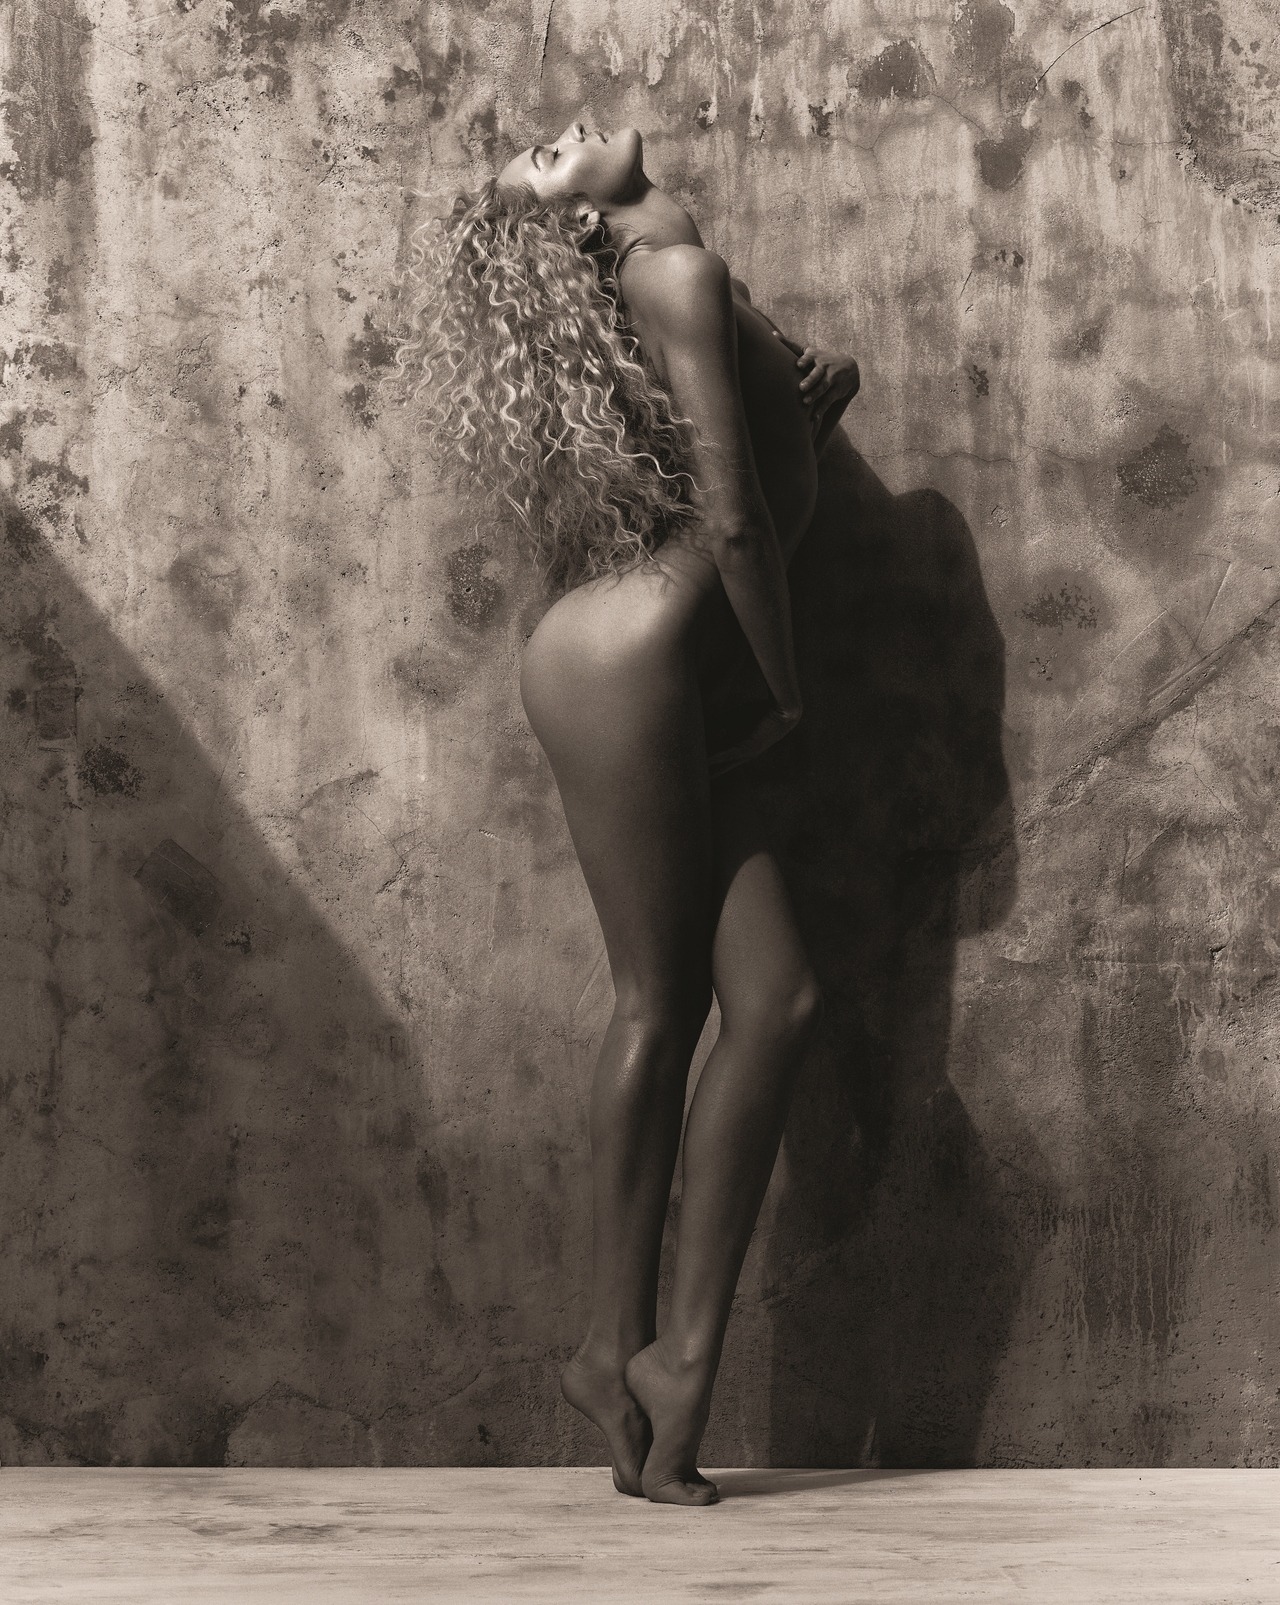 Candice Swanepoel Photography by Mariano Vivanco Published in Muse #30, Summer 2012